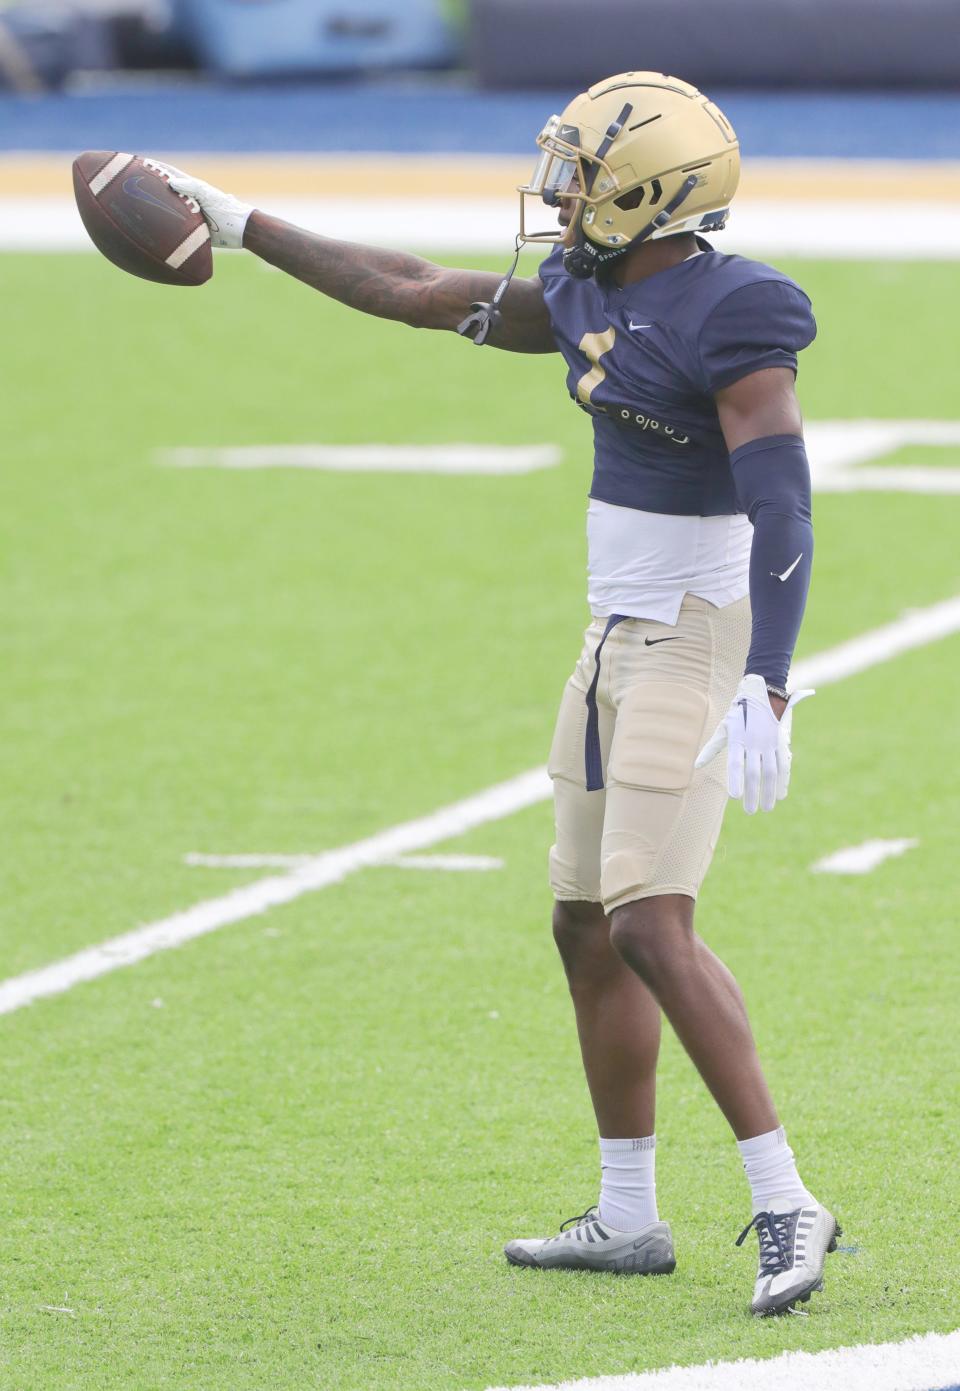 University of Akron receiver Daniel George signals first down after a catch over the middle during practice Aug. 15 in Akron.